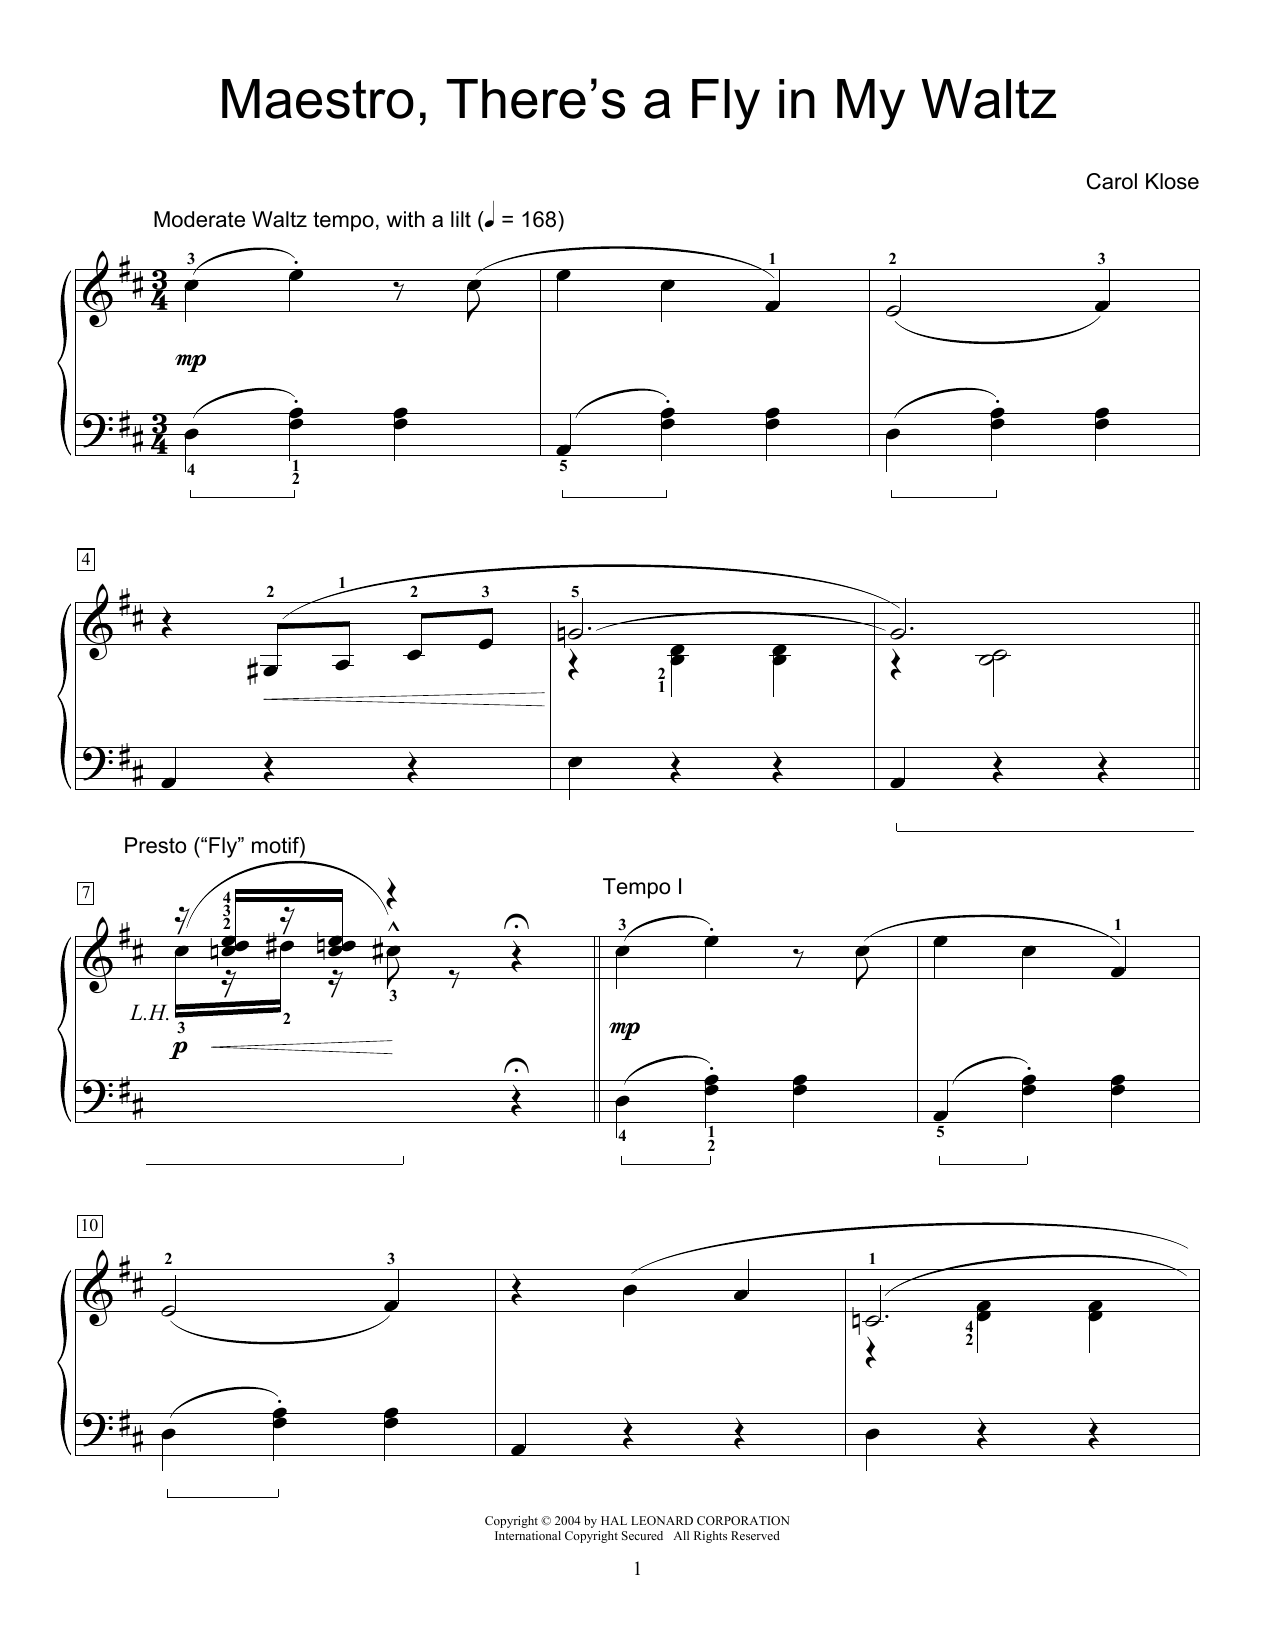 Download Carol Klose Maestro, There's A Fly In My Waltz Sheet Music